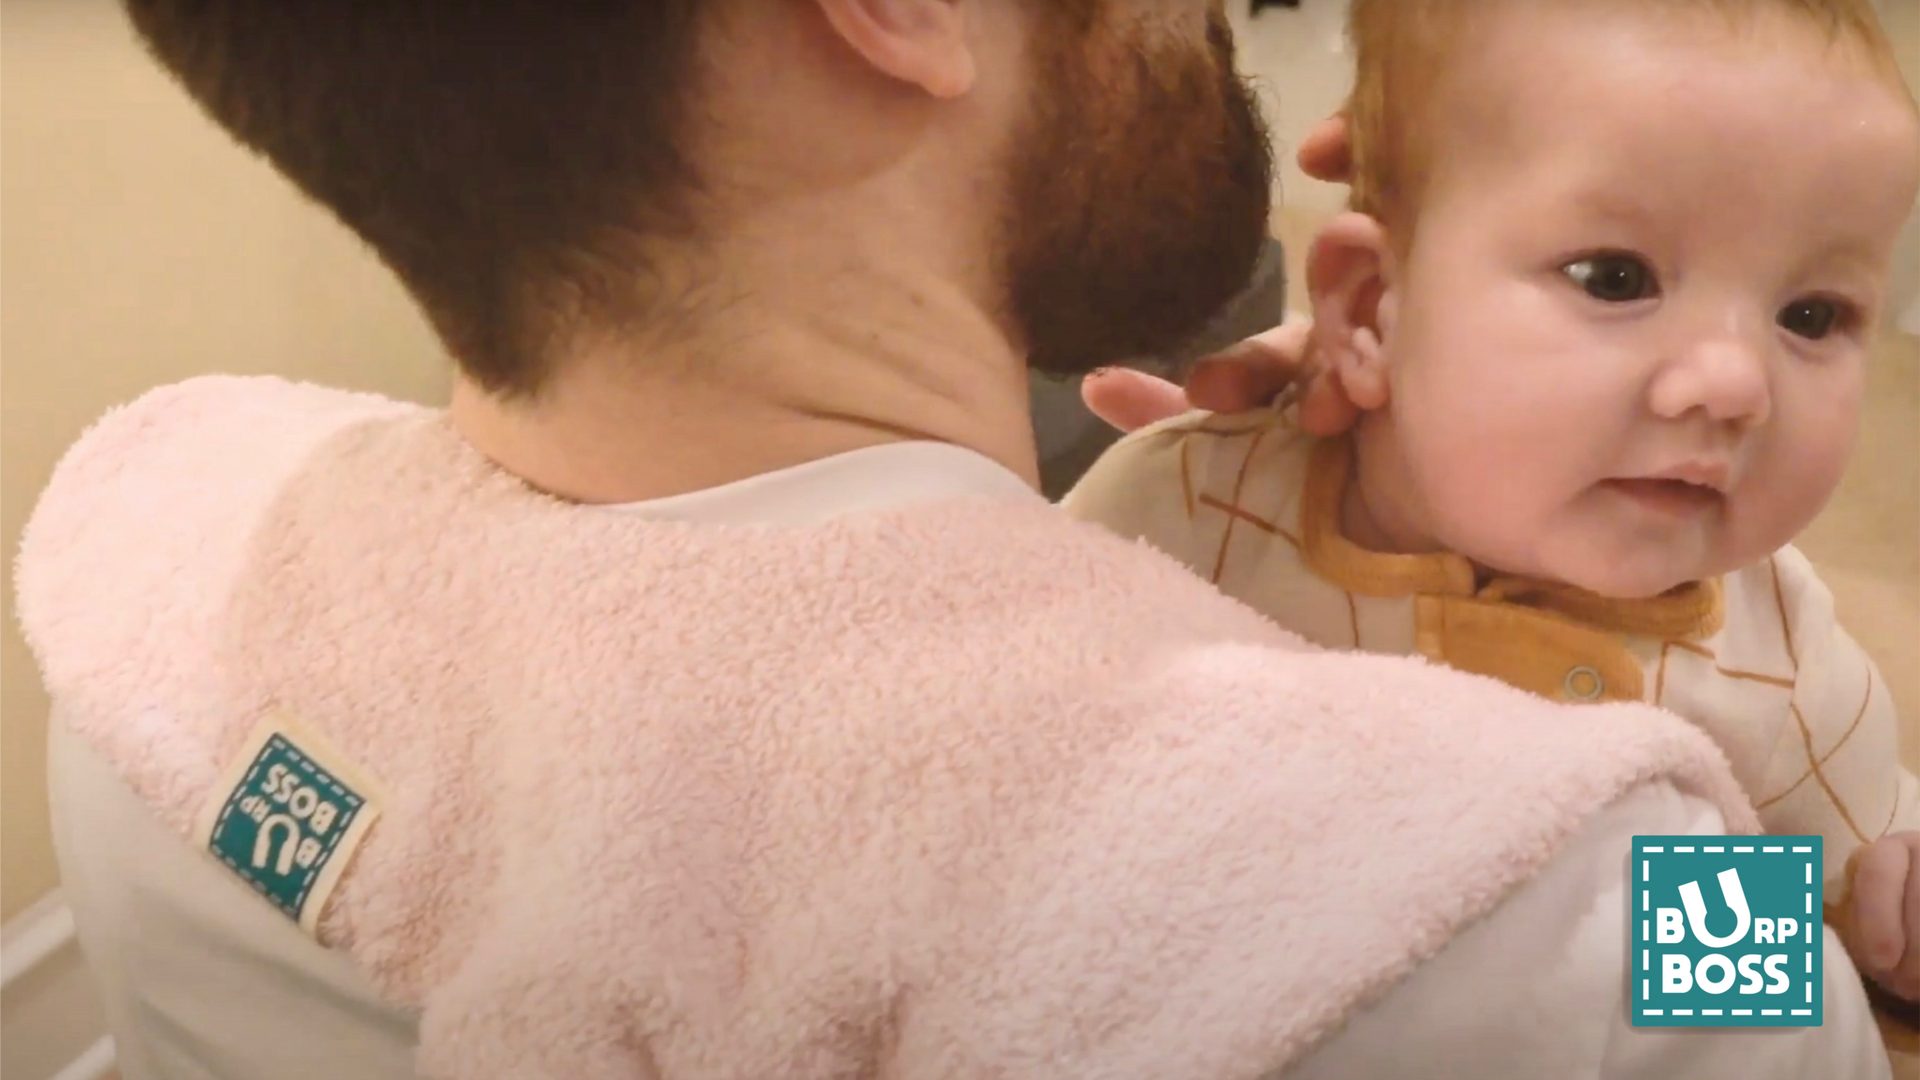 Load video: The burp boss burp cloth being used by a dad and his daughter